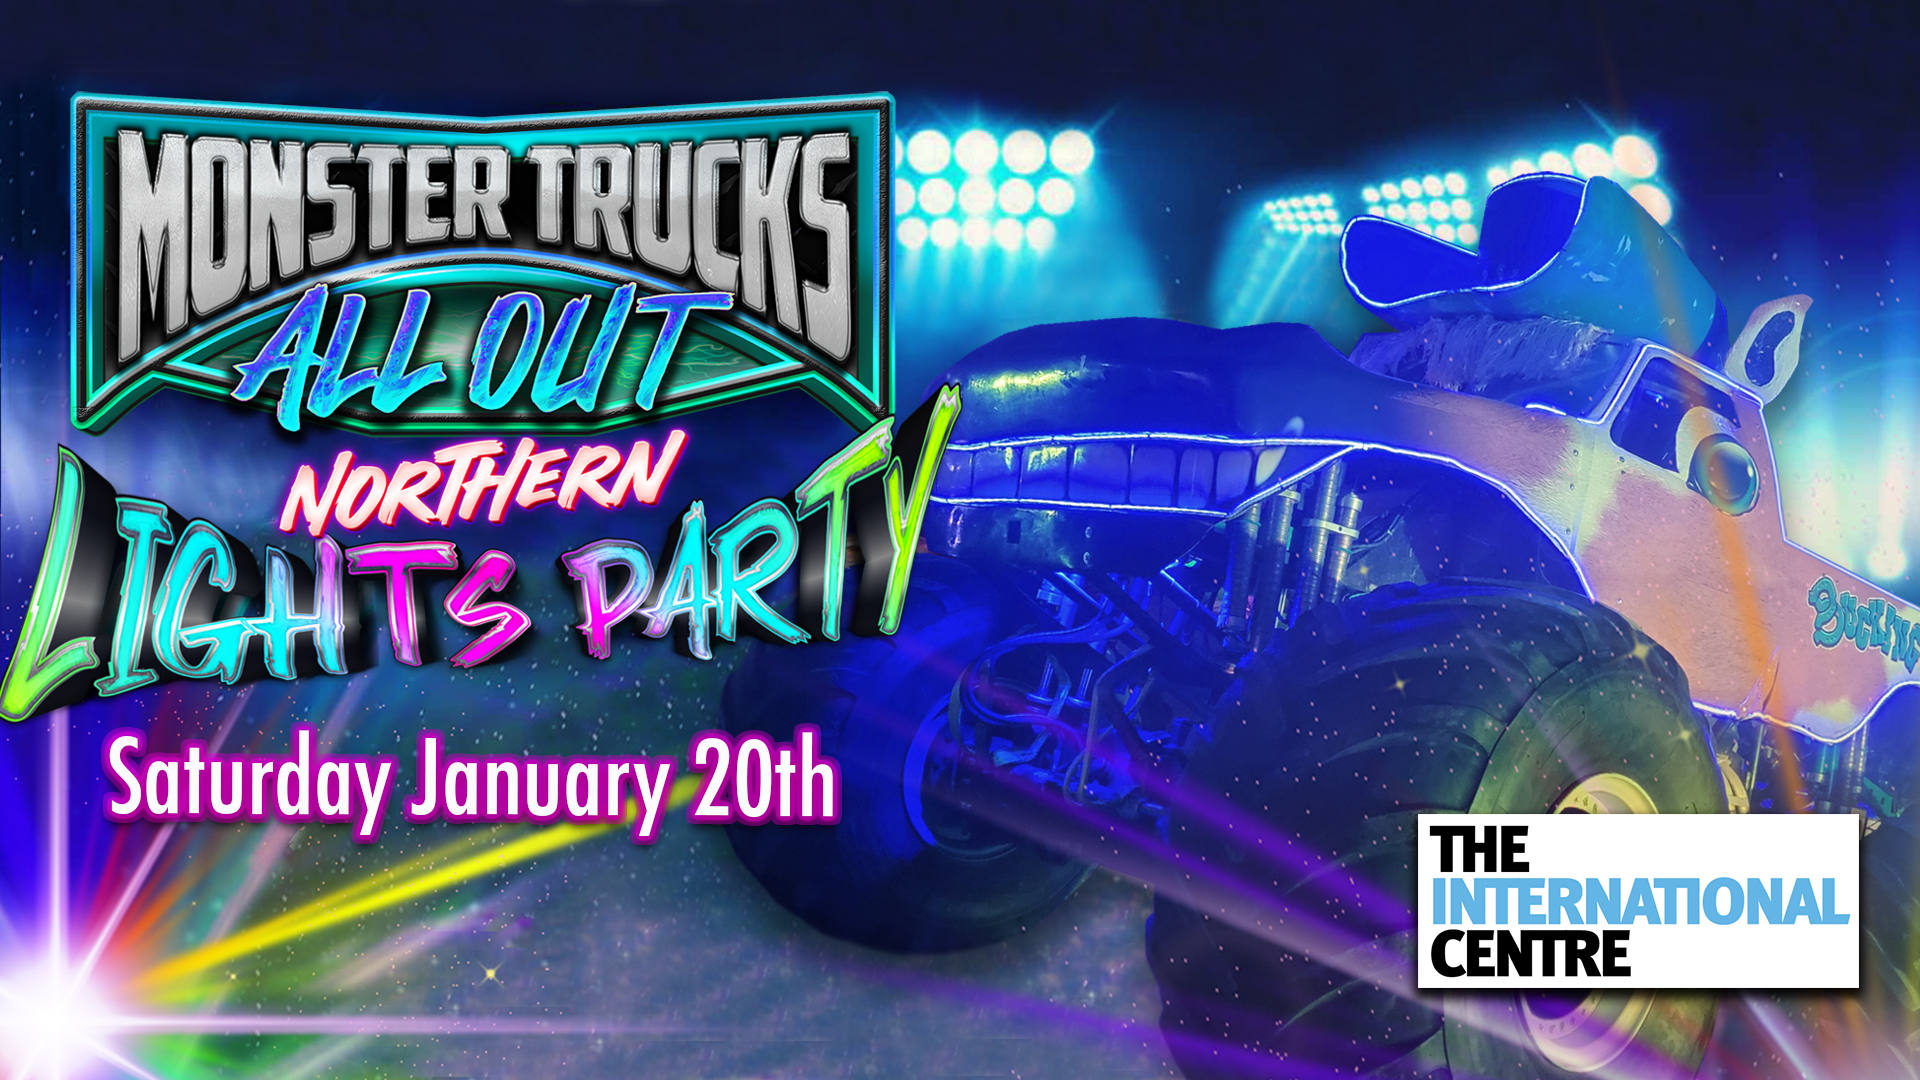 Monster Trucks All Out Northern Lights Party